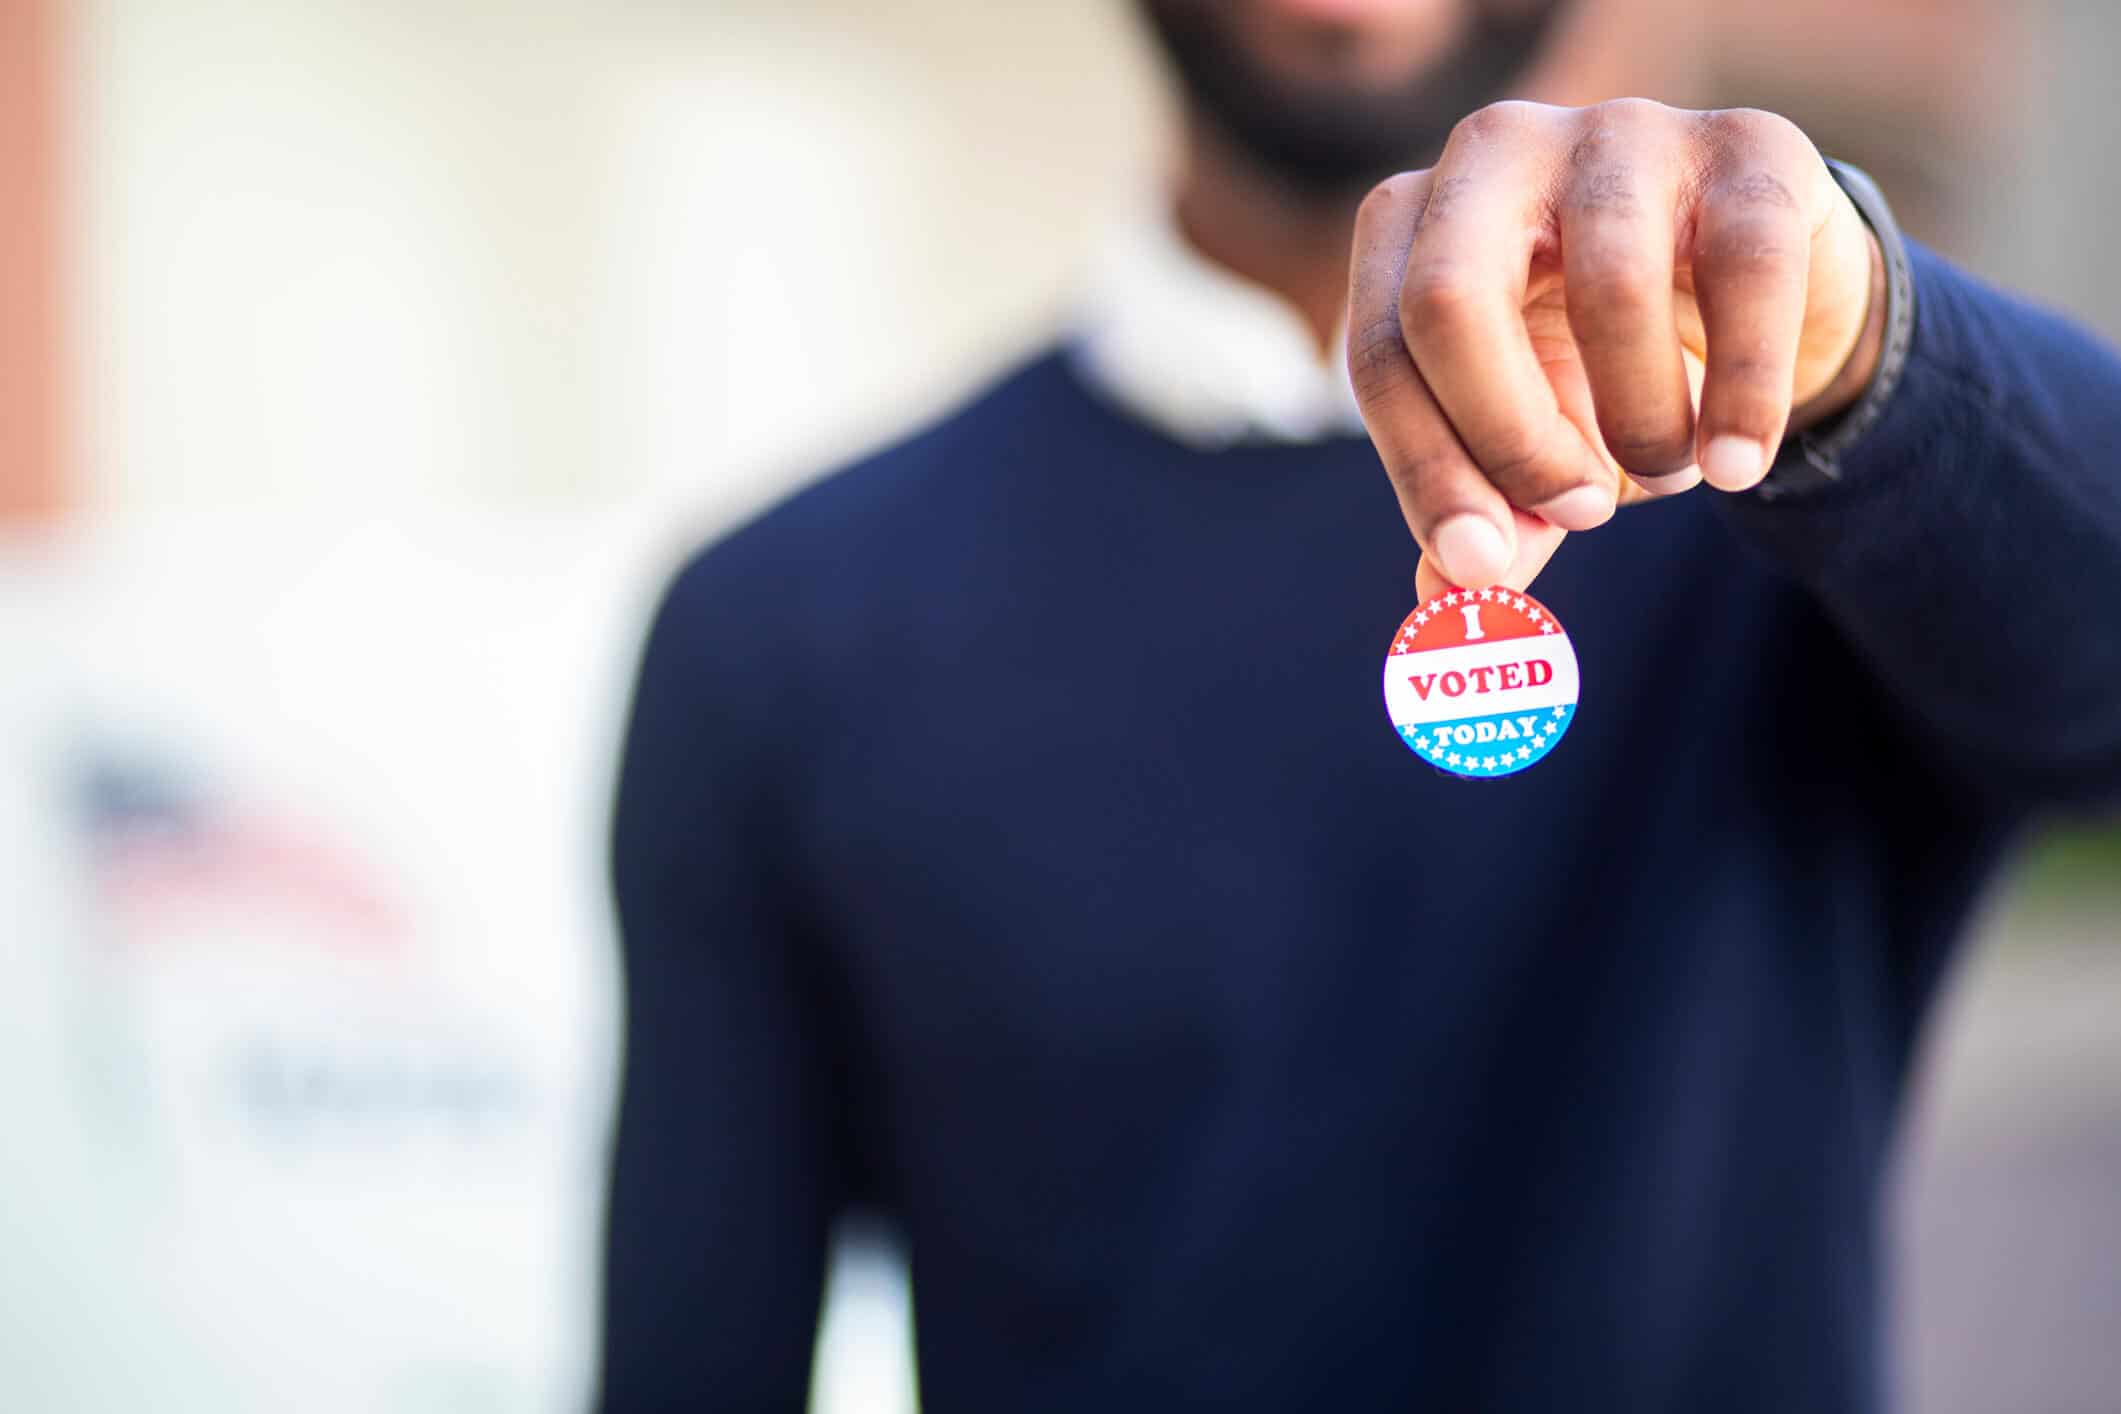 Young black business owner holding an "I Voted" sticker